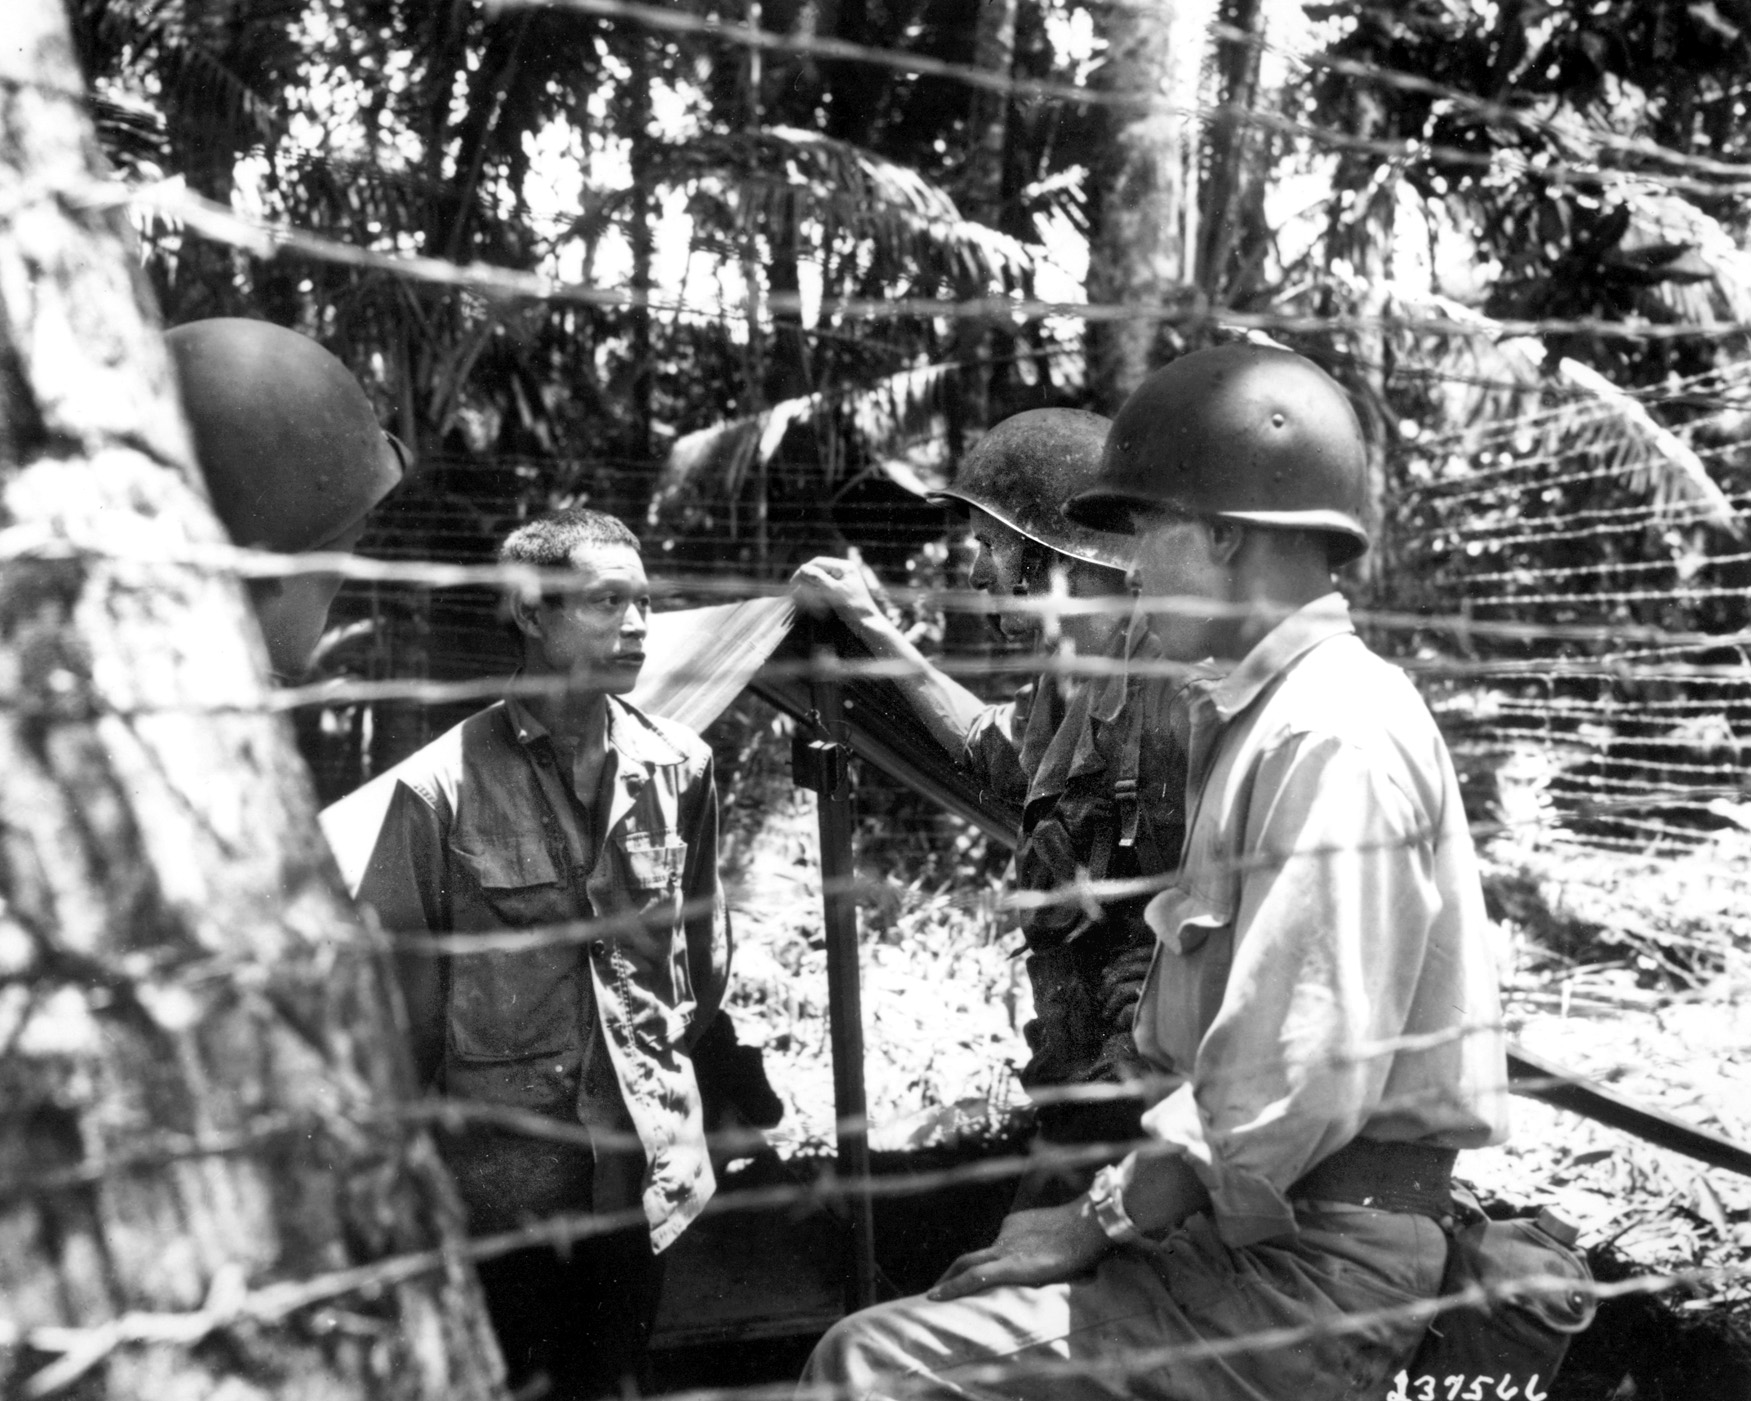 On September 12, 1943, at Vella Lave, New Caledonia, Major John Burden and Nisei soldiers of the 25th Division Language Section, attached to G2 (Military Intelligence), interrogate a Japanese prisoner of war in a temporary stockade.